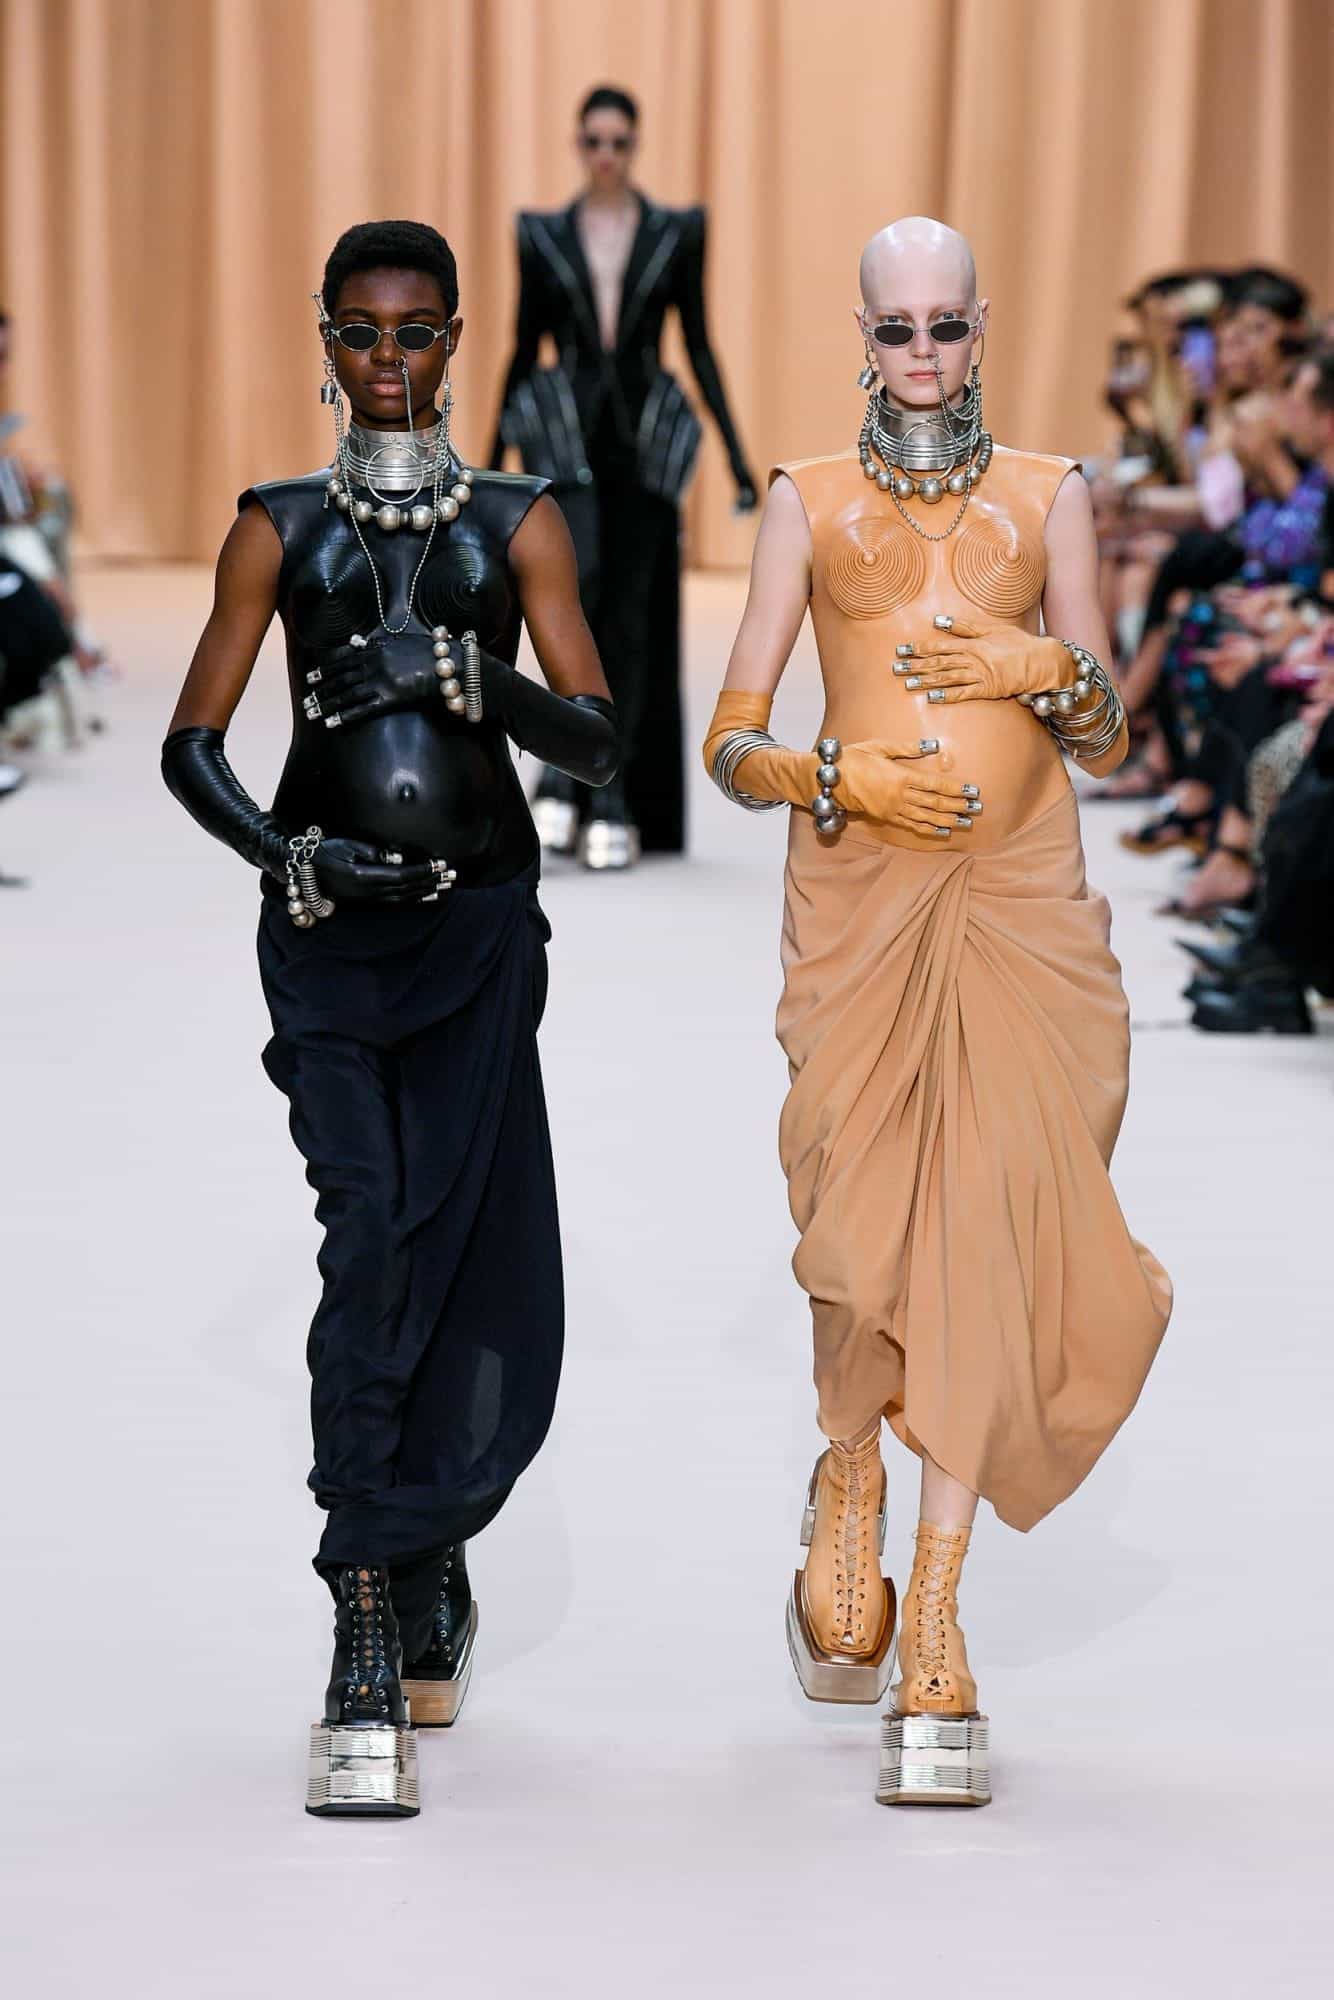 Pregnant Gaultier models sport combat-style boots at Paris Fashion Week 2022.